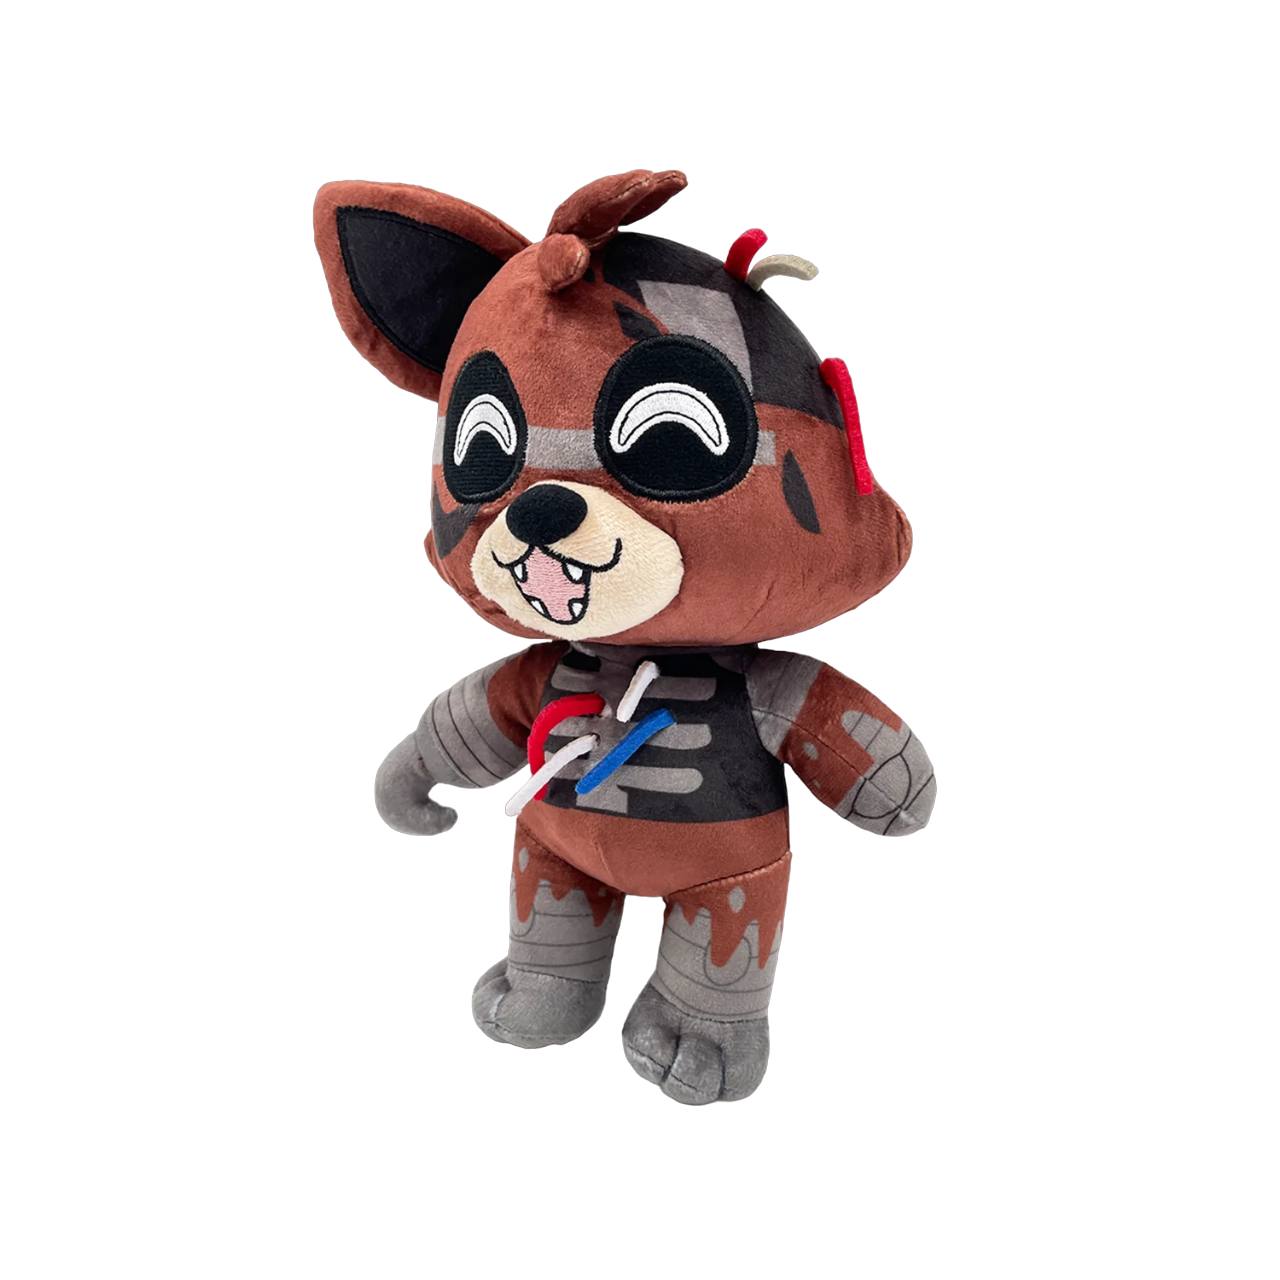 Five Nights At Freddys - Ignited Foxy Youtooz Plush (9in)